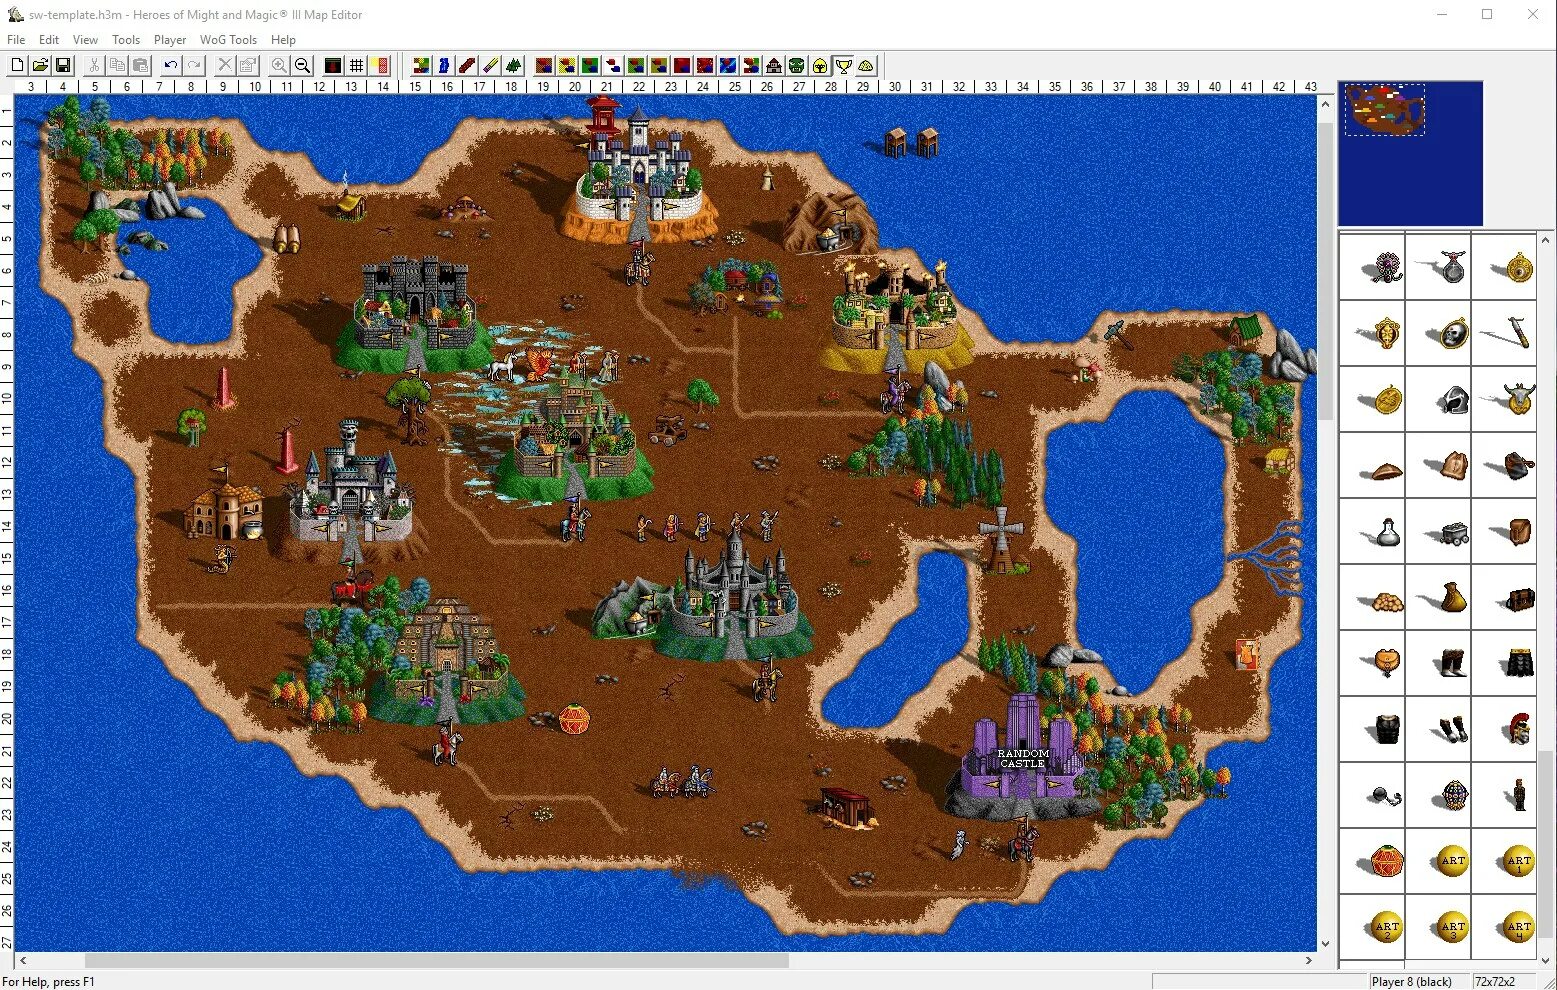 Heroes of might and Magic 3 карта. Heroes of might and Magic 2 карты. Might and Magic 1 карта. Heroes of might and Magic 6 Map. Лучшие карты героев